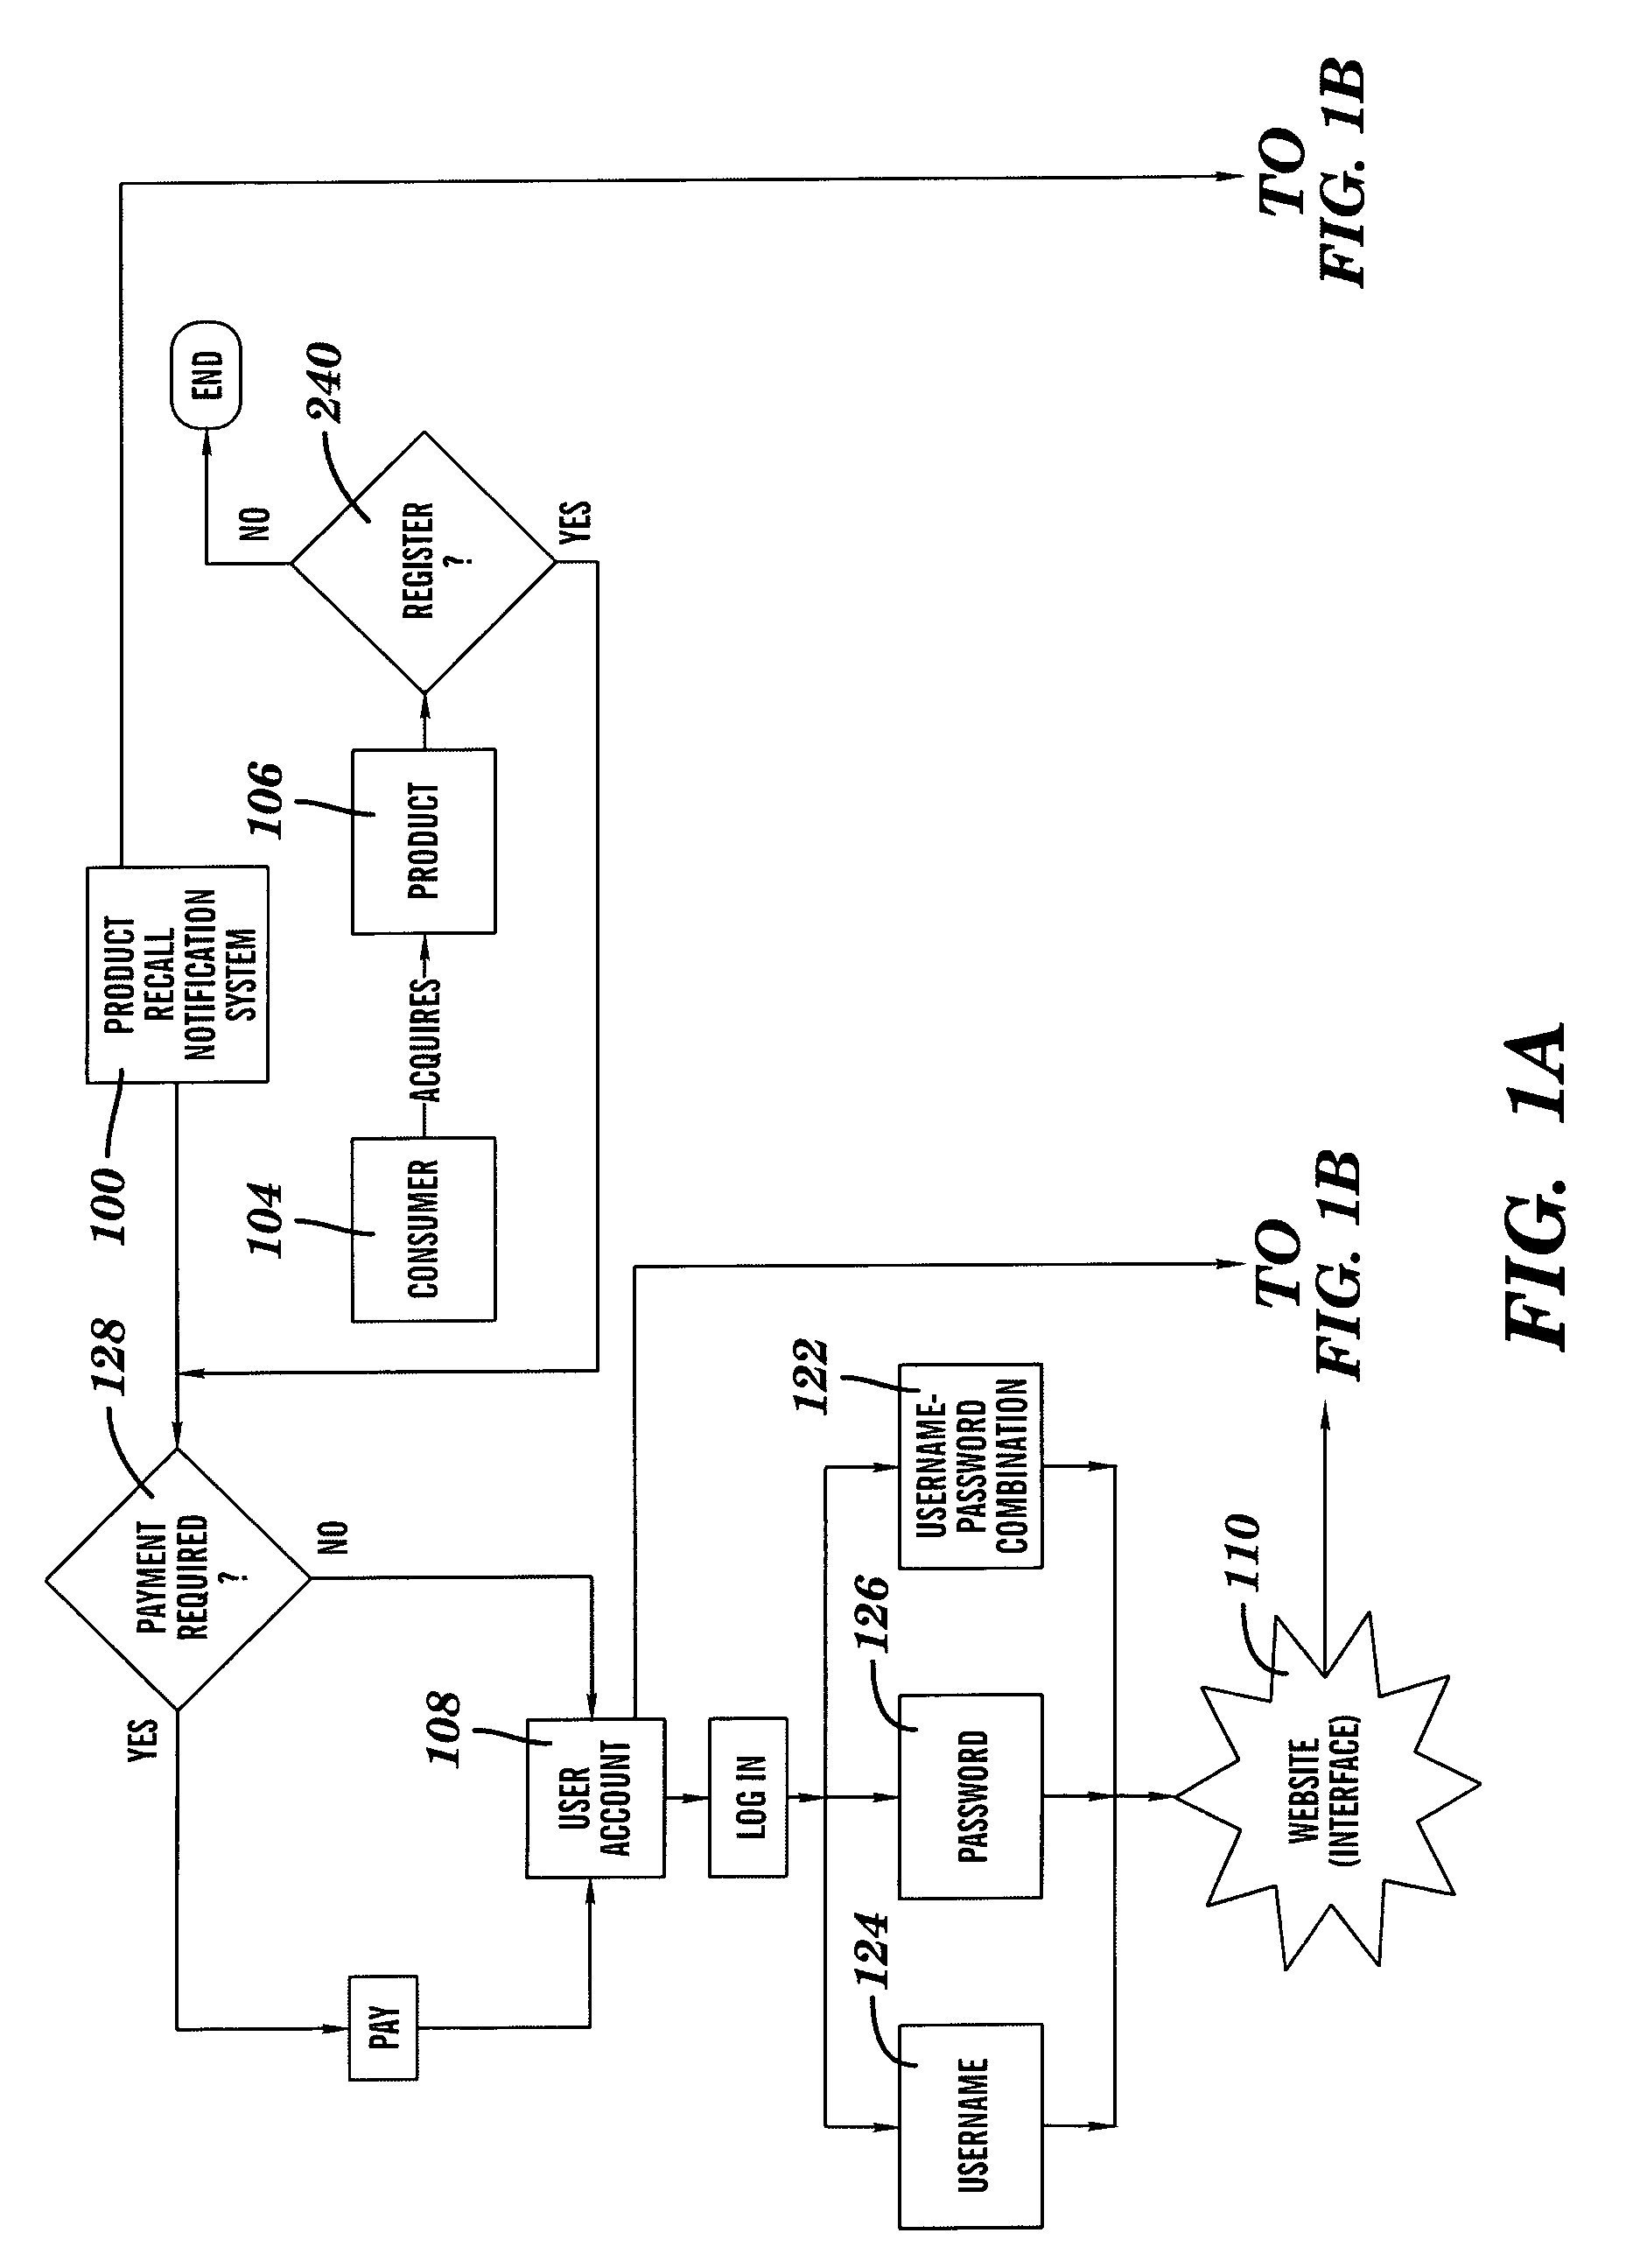 System and Method of Selectively Notifying Consumers of Product Recalls